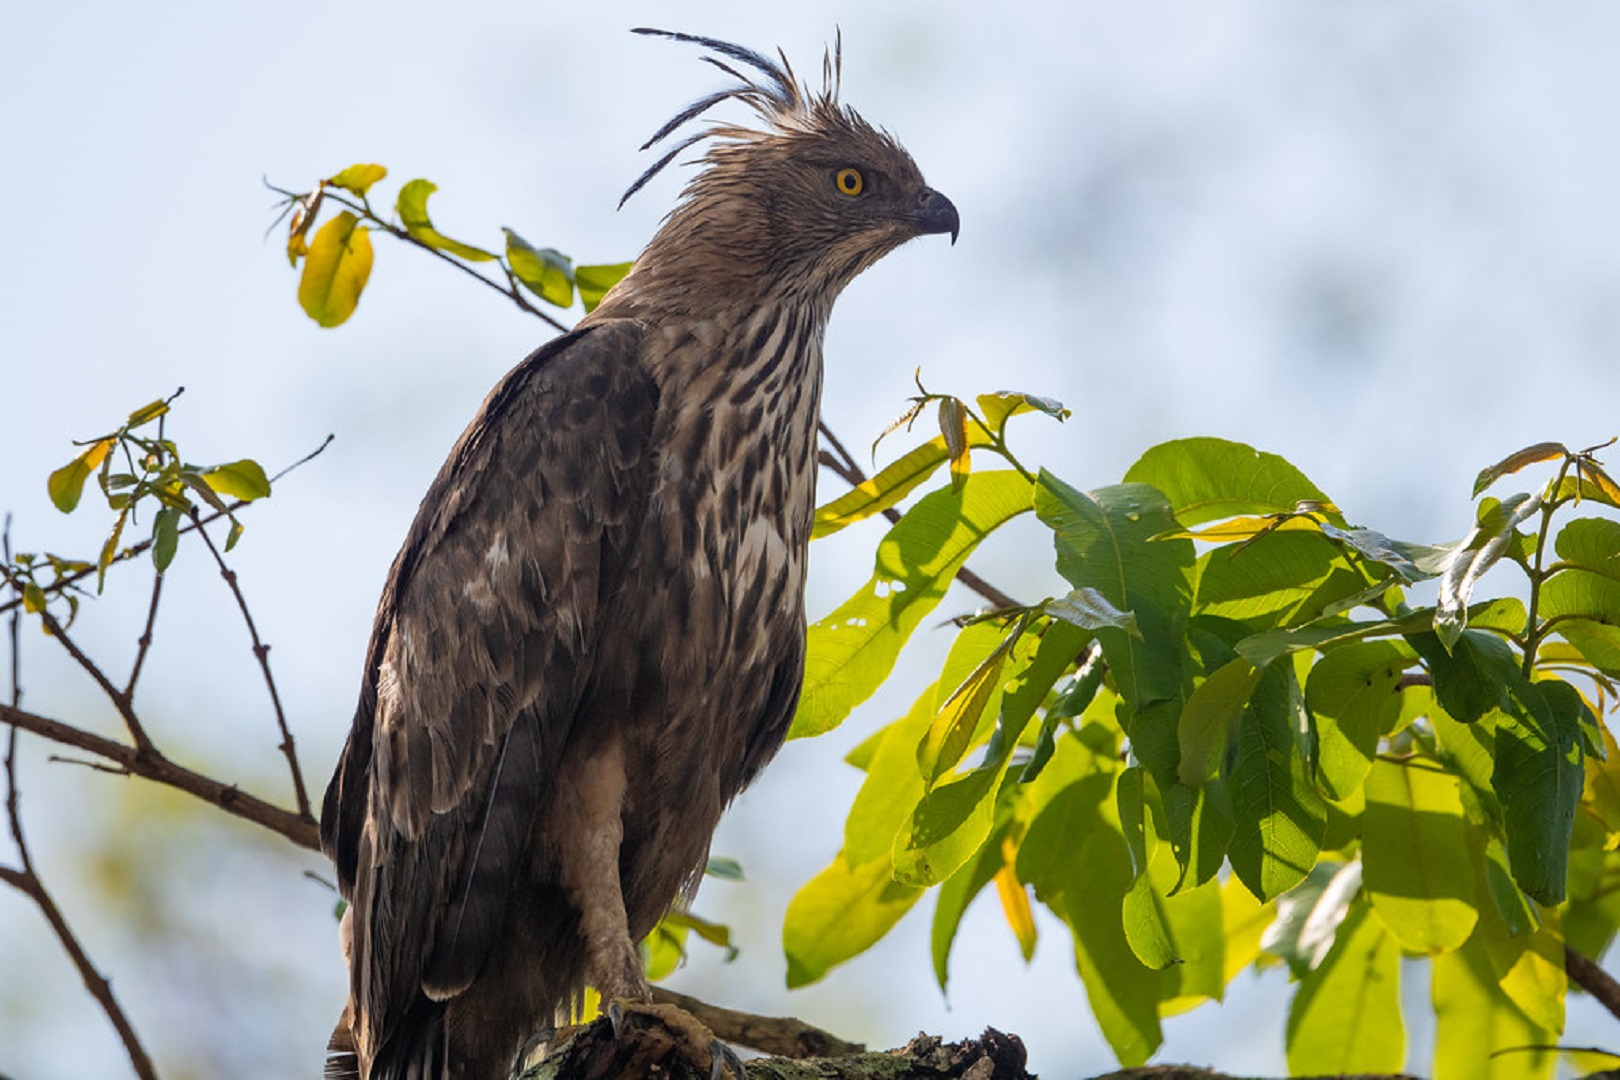 The Crested Eagle in Semuliki National Park, near Lake Albert, is one of the bird species to spot on your budget Batwa visit and birding safari